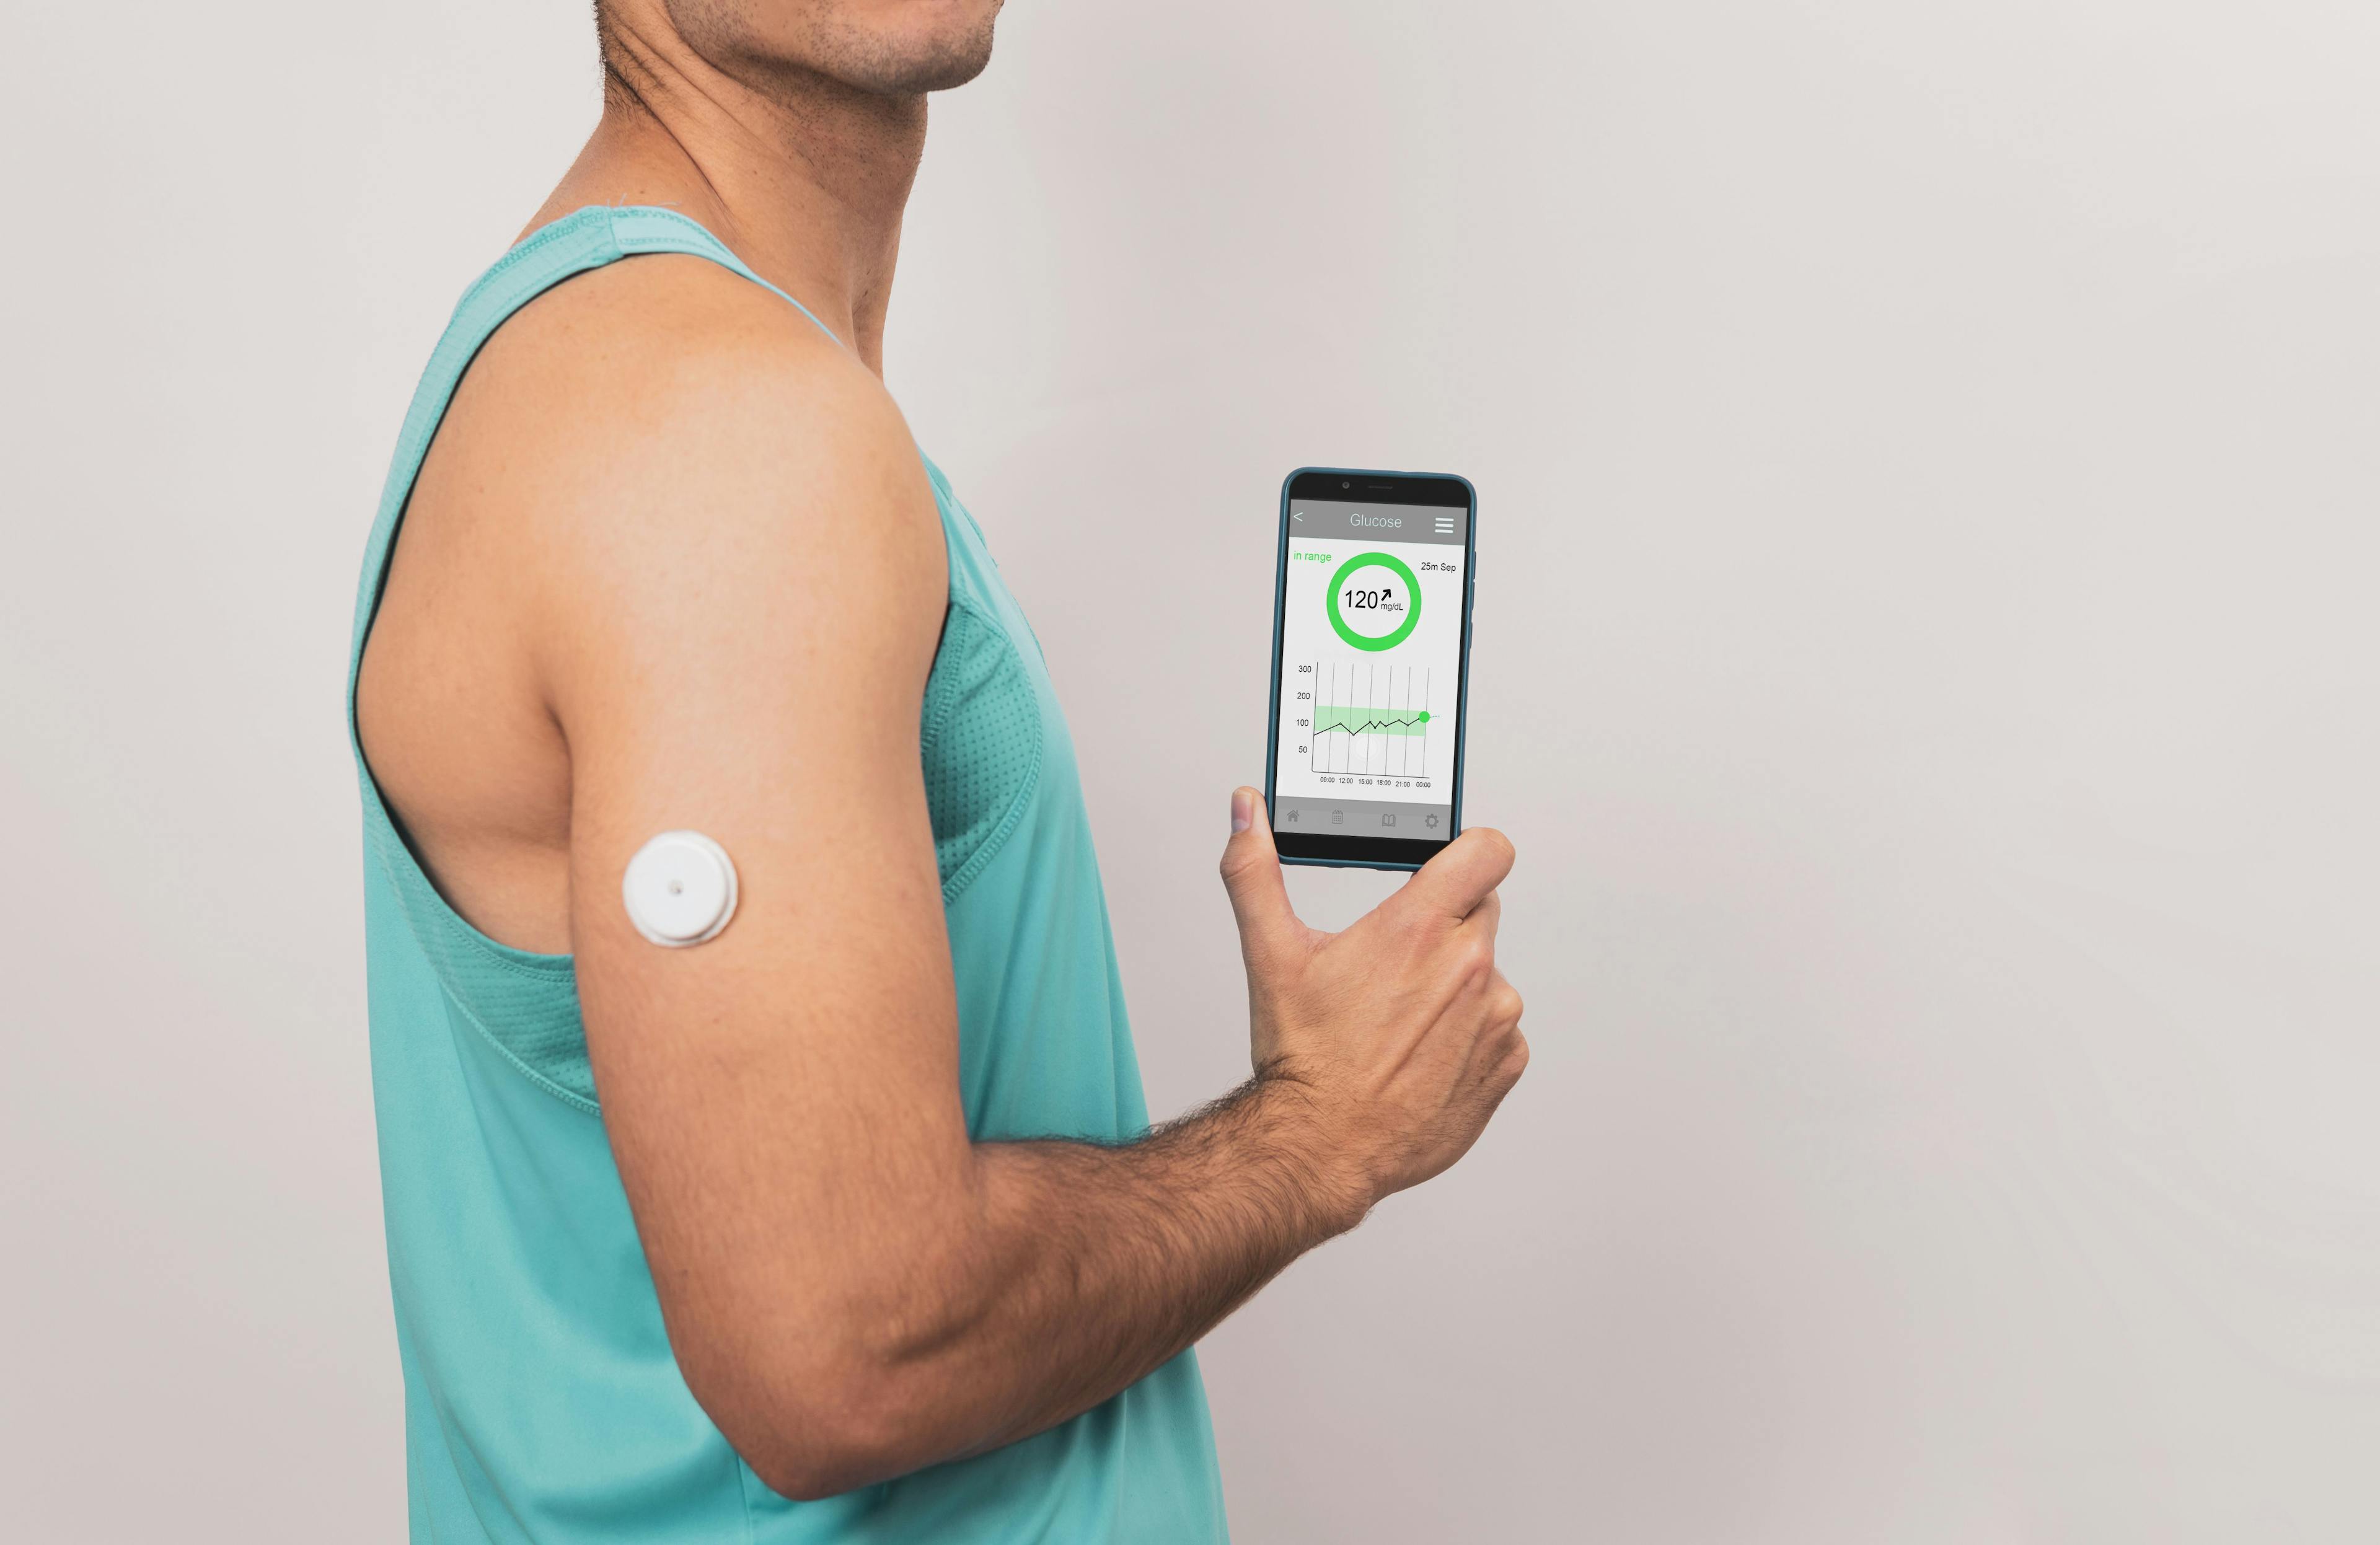 Man with continuous glucose monitor sensor in arm | Image credit: © Yistocking  stock.adobe.com